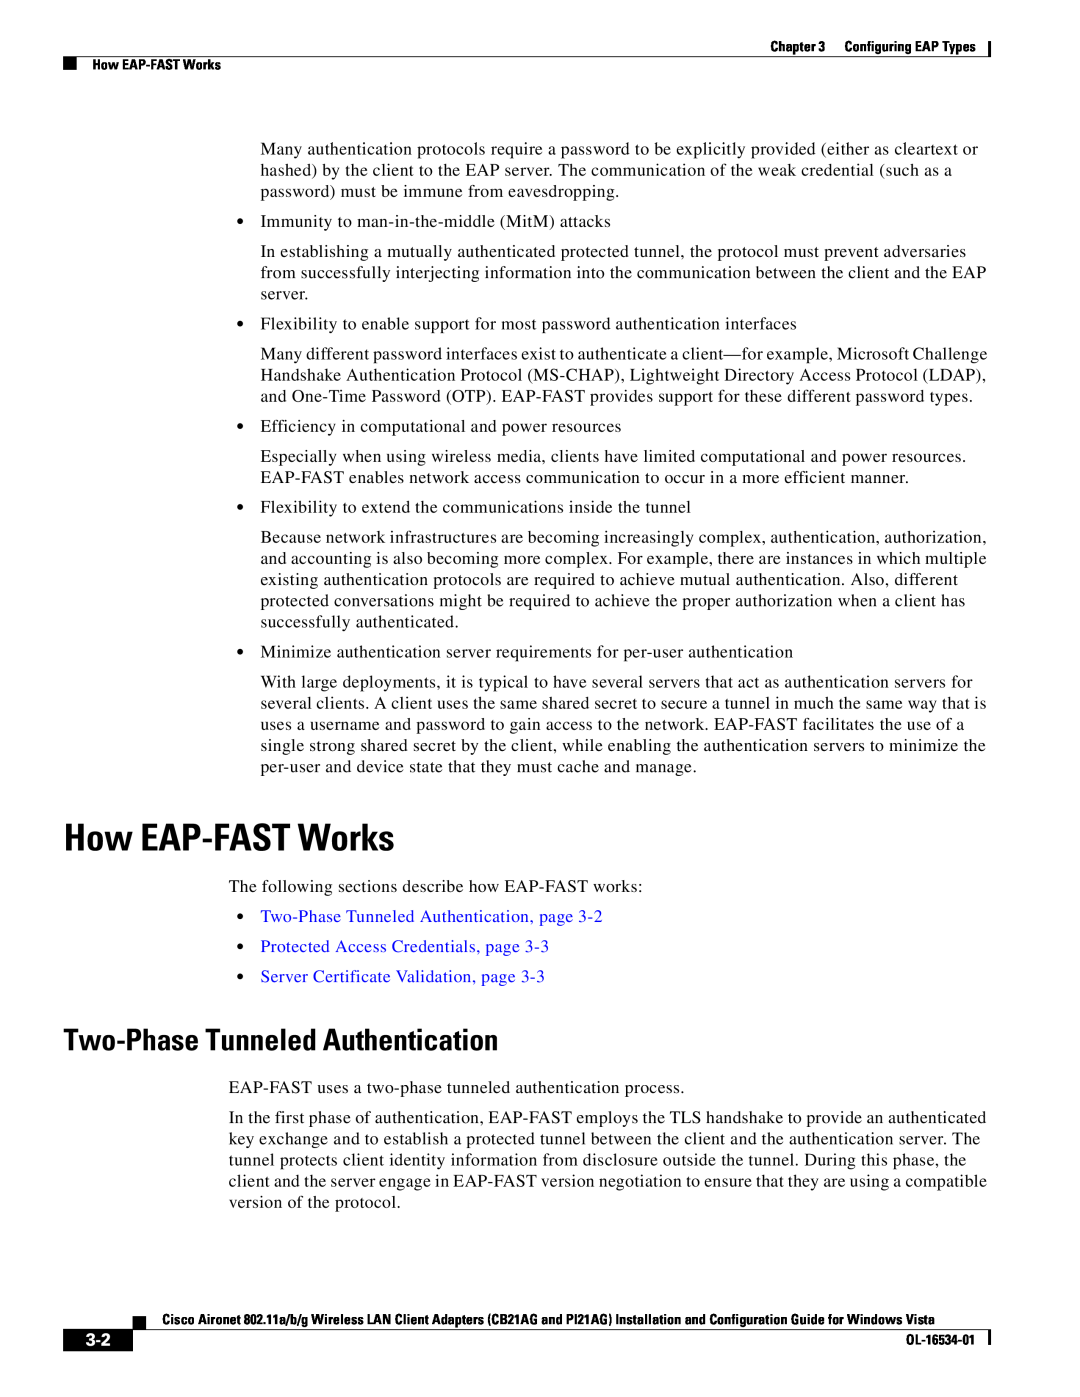 Cisco Systems PI21AG How EAP-FAST Works, Two-Phase Tunneled Authentication, page, Protected Access Credentials, page 